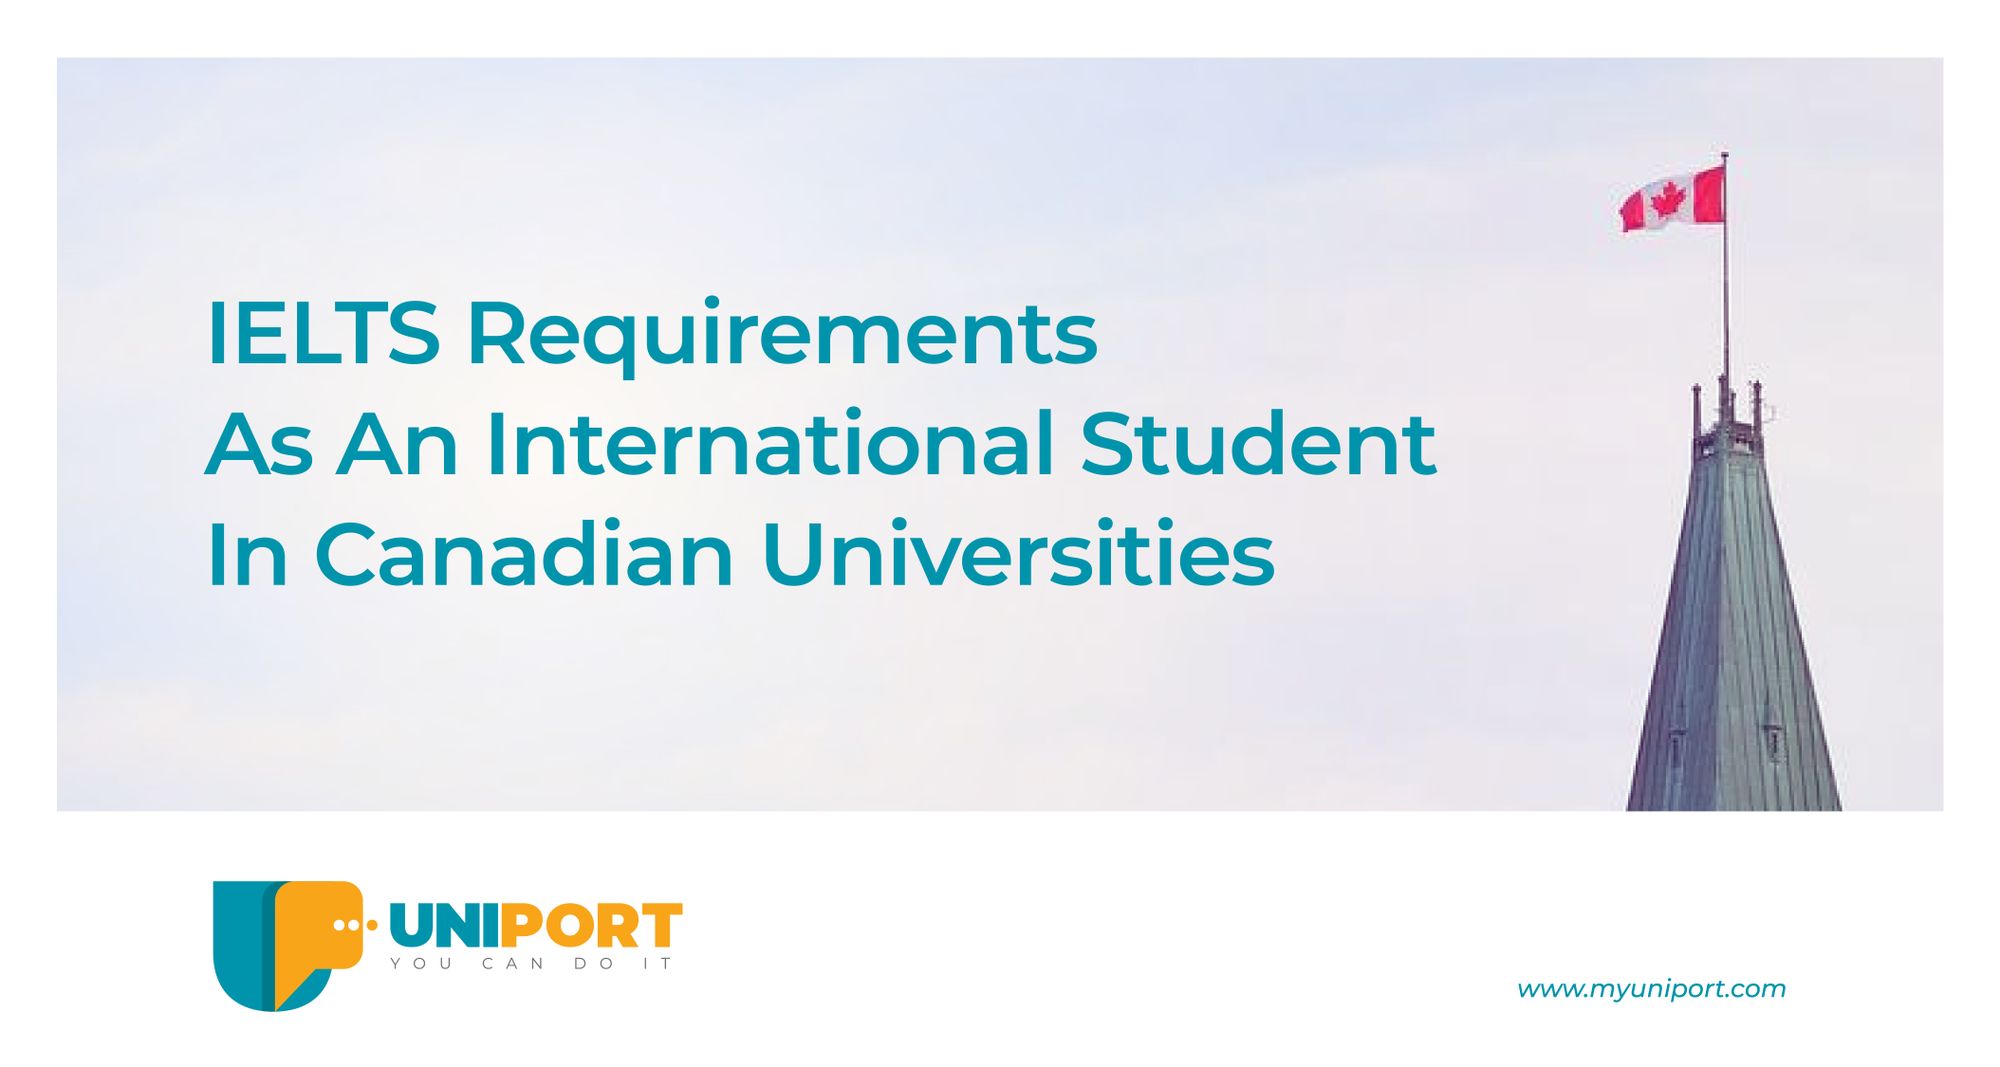 IELTS Requirements As An International Student In Canadian Universities